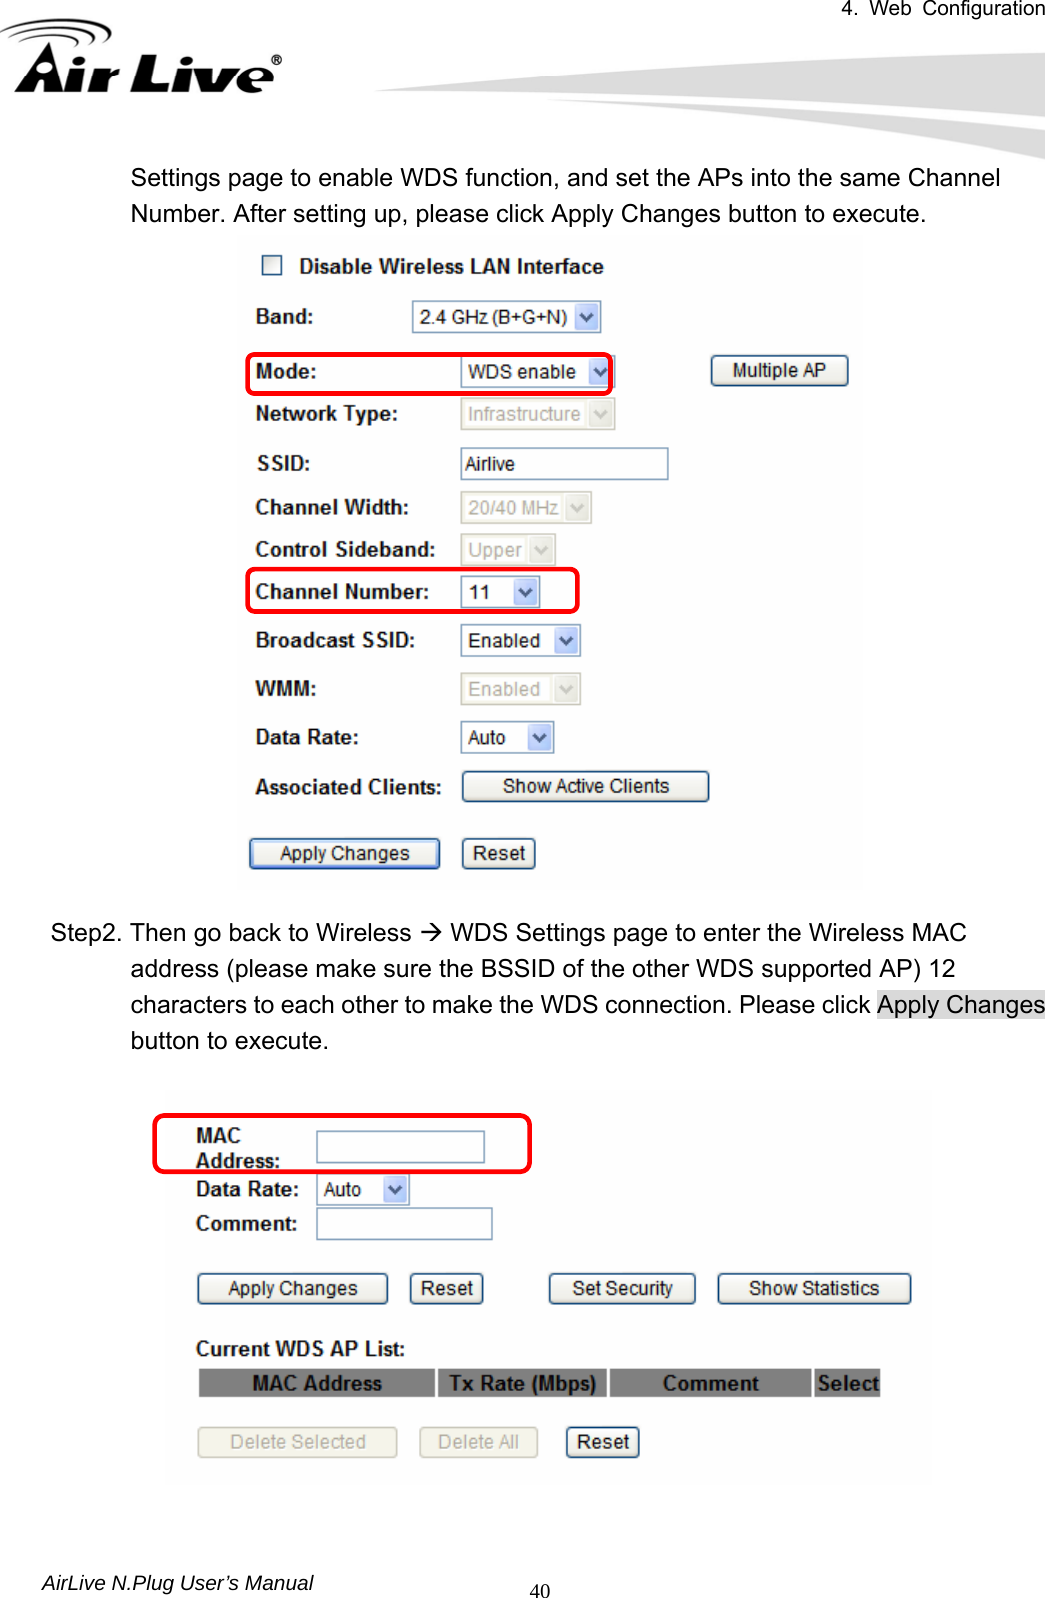 4. Web Configuration       AirLive N.Plug User’s Manual  40Settings page to enable WDS function, and set the APs into the same Channel Number. After setting up, please click Apply Changes button to execute.     Step2. Then go back to Wireless Æ WDS Settings page to enter the Wireless MAC address (please make sure the BSSID of the other WDS supported AP) 12 characters to each other to make the WDS connection. Please click Apply Changes button to execute.     